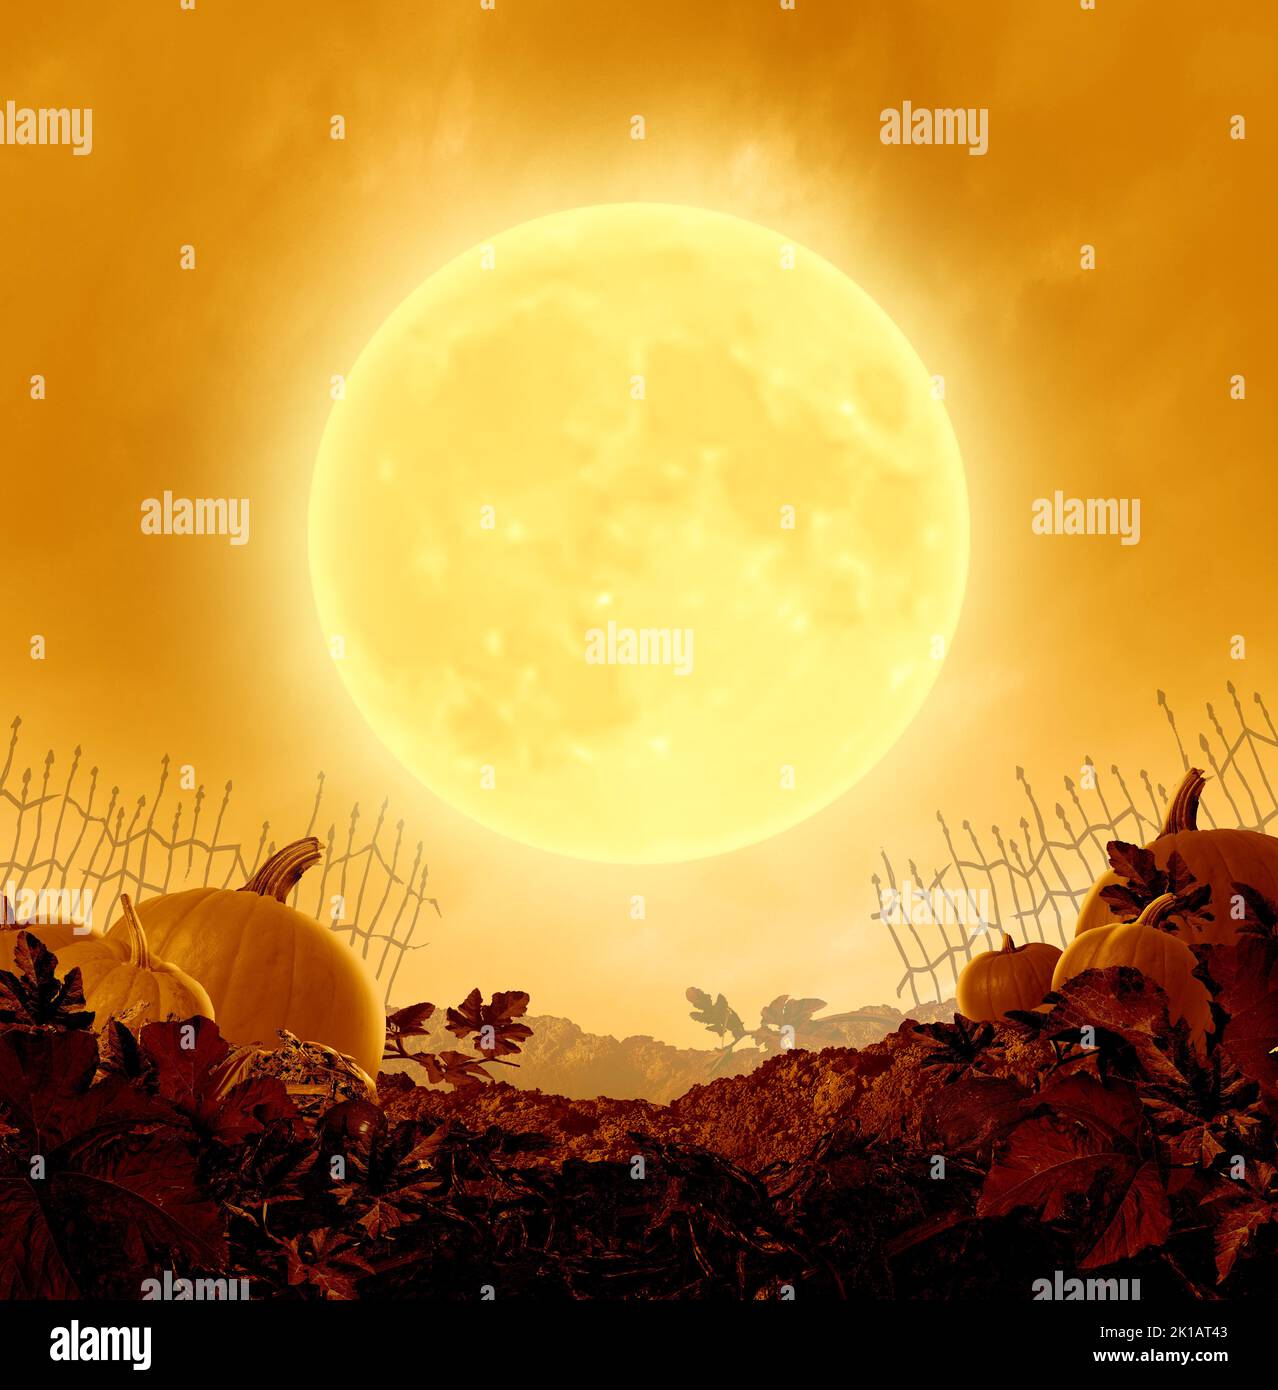 Halloween night poster and Autumn party background with an orange moon glowing on a grungy old creepy pumpkin patch in a 3D illustration style. Stock Photo